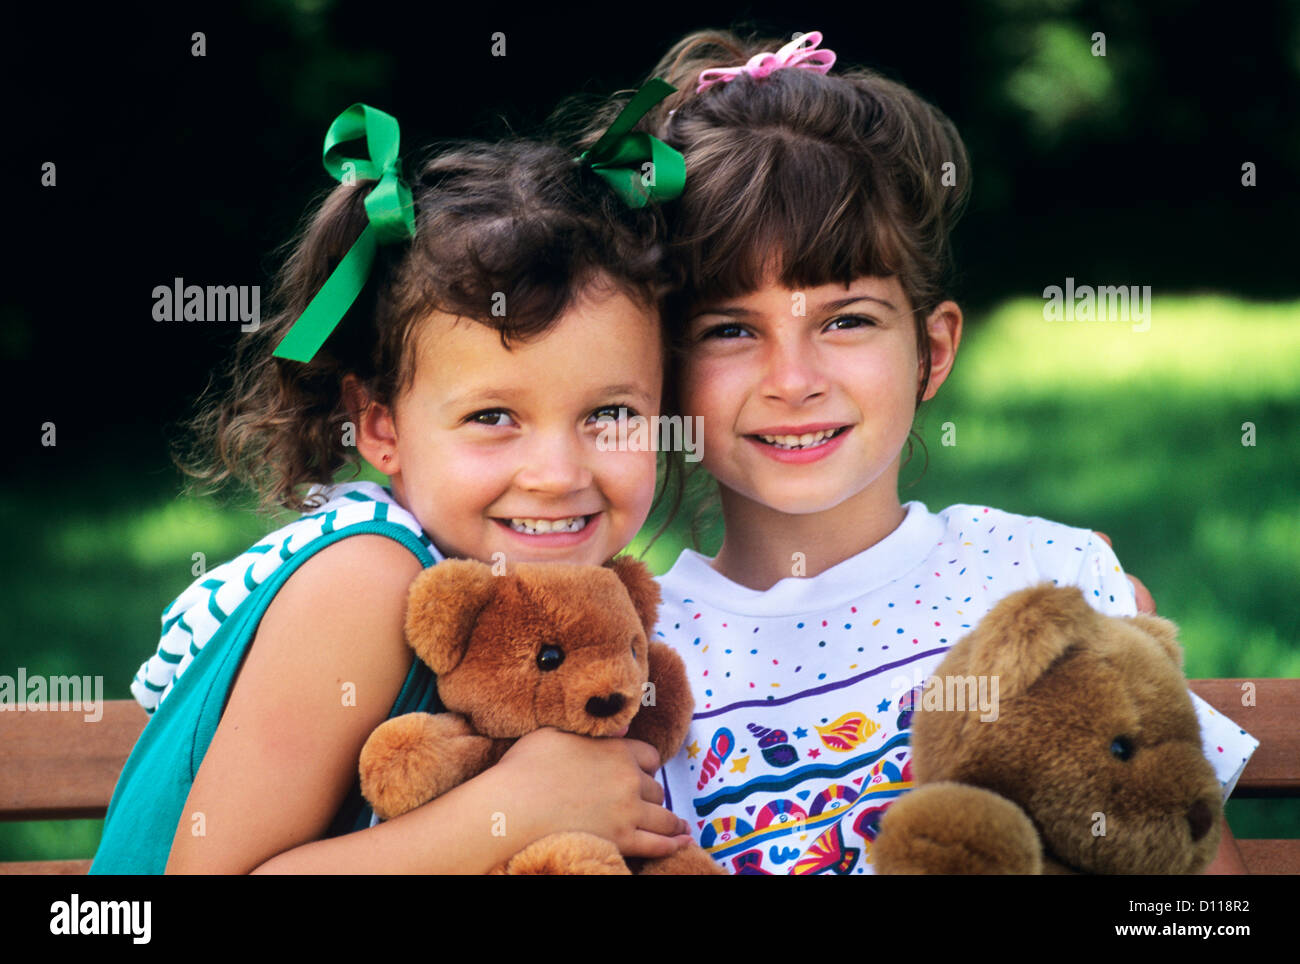 1990s TWO BRUNETTE GIRLS WITH TEDDY BEARS LOOKING AT CAMERA Stock Photo